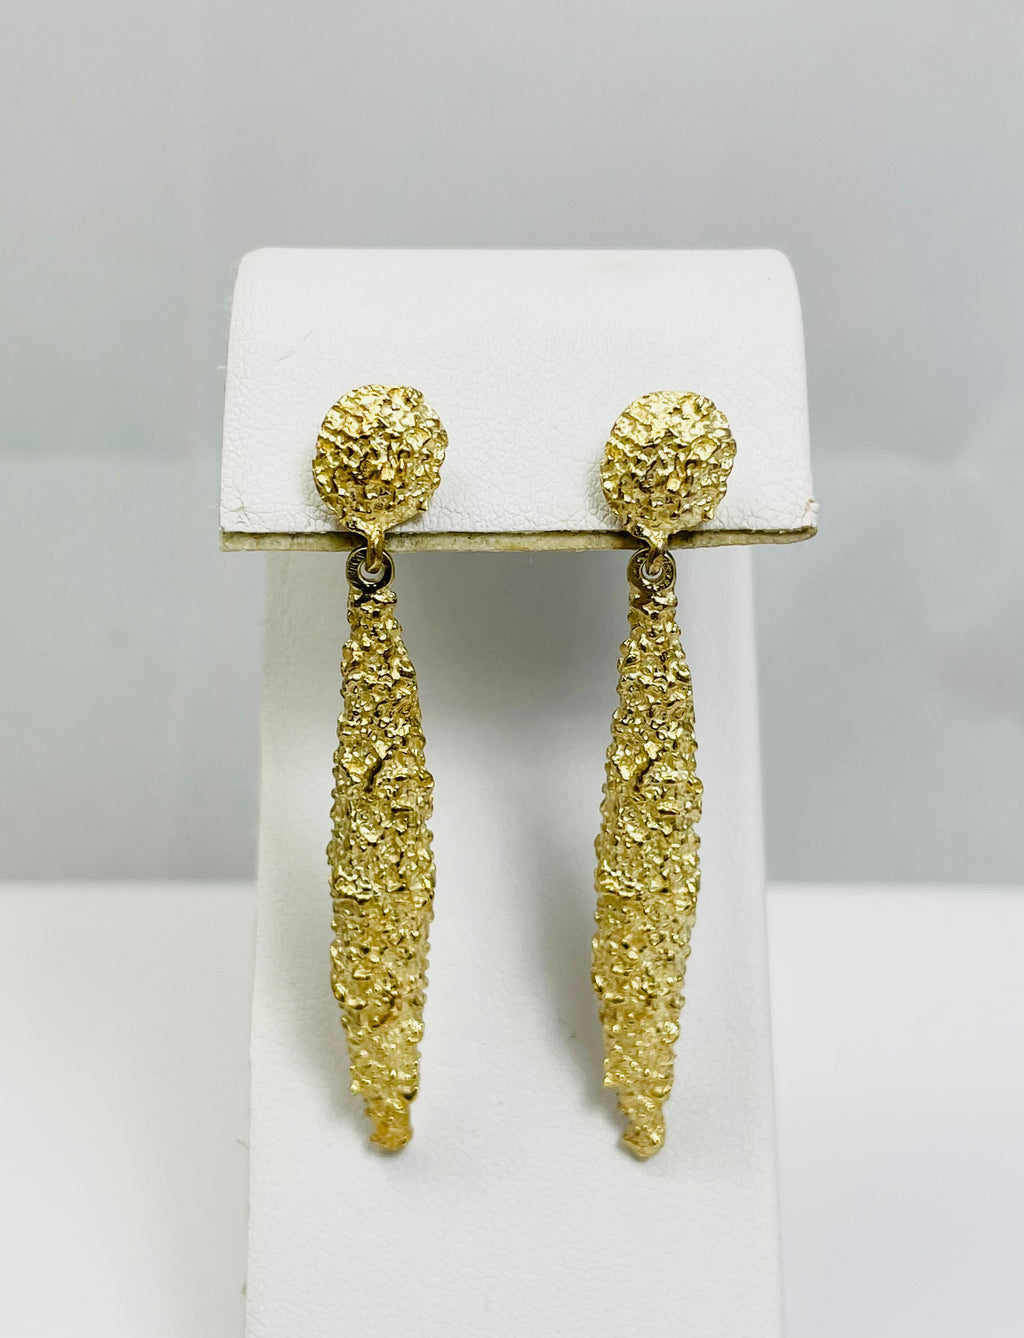 Cool Vintage 14k Yellow Gold Nugget Dangle Earrings